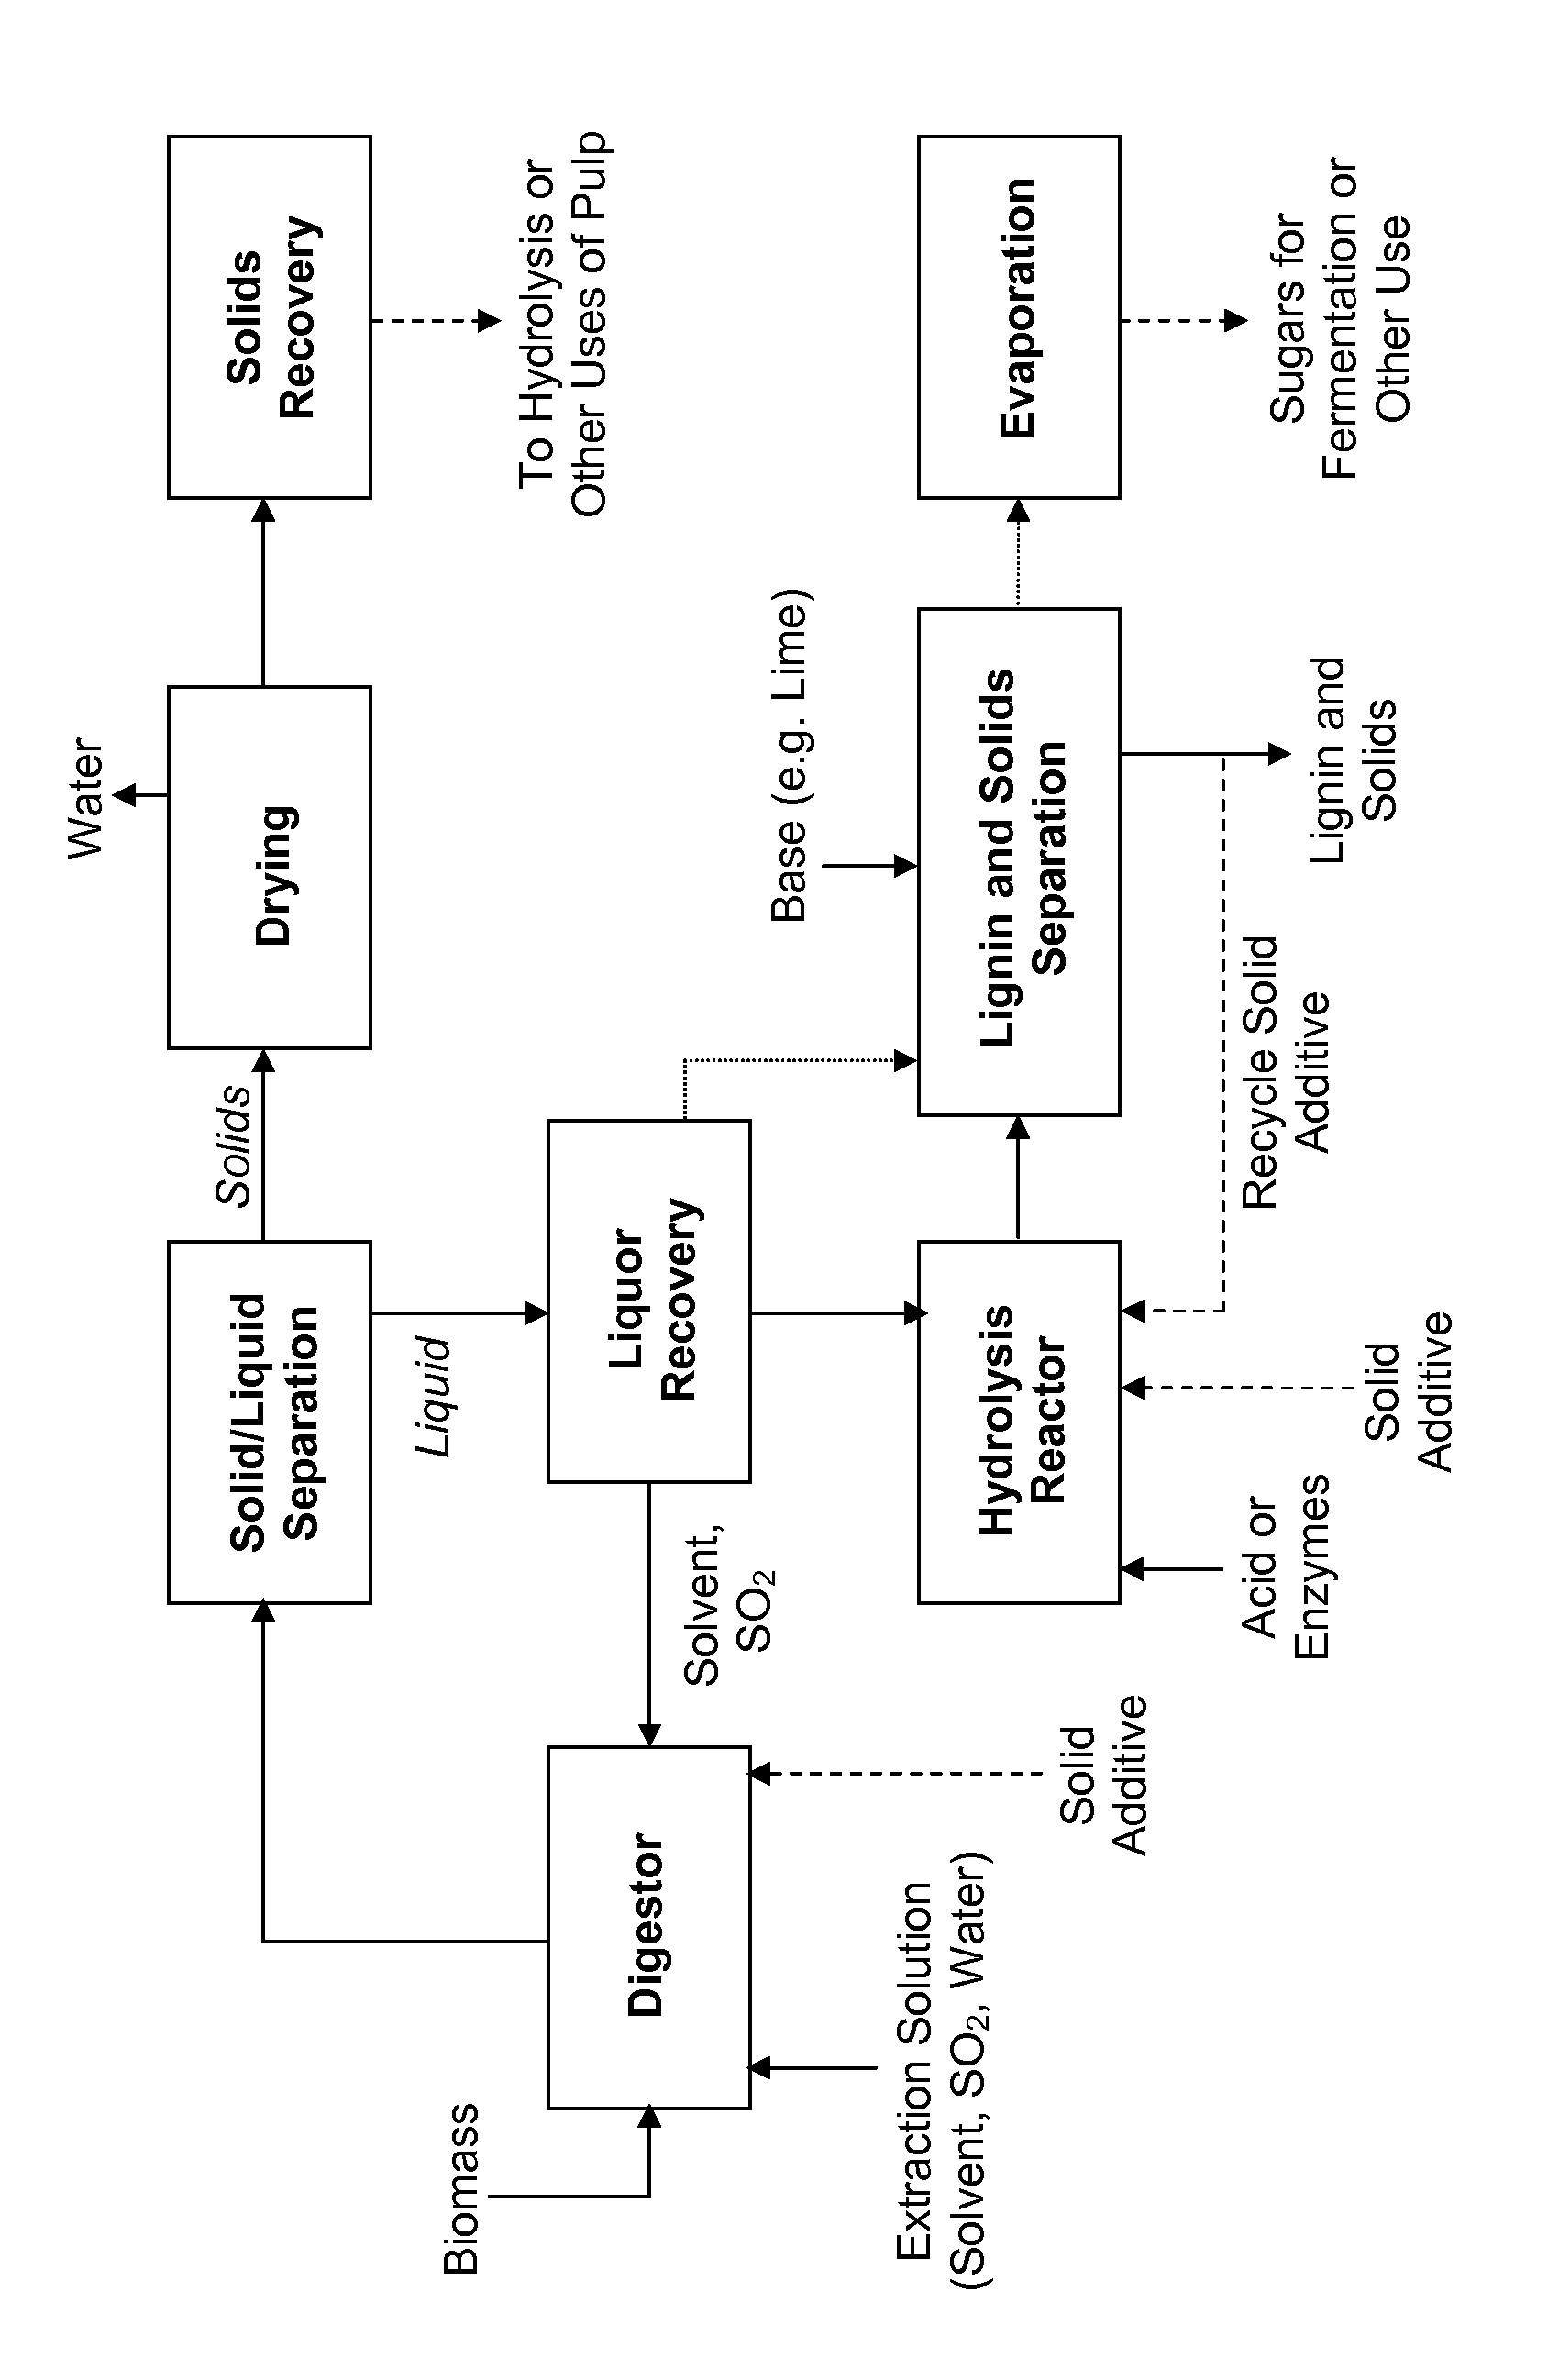 Processes and apparatus for lignin separation in biorefineries